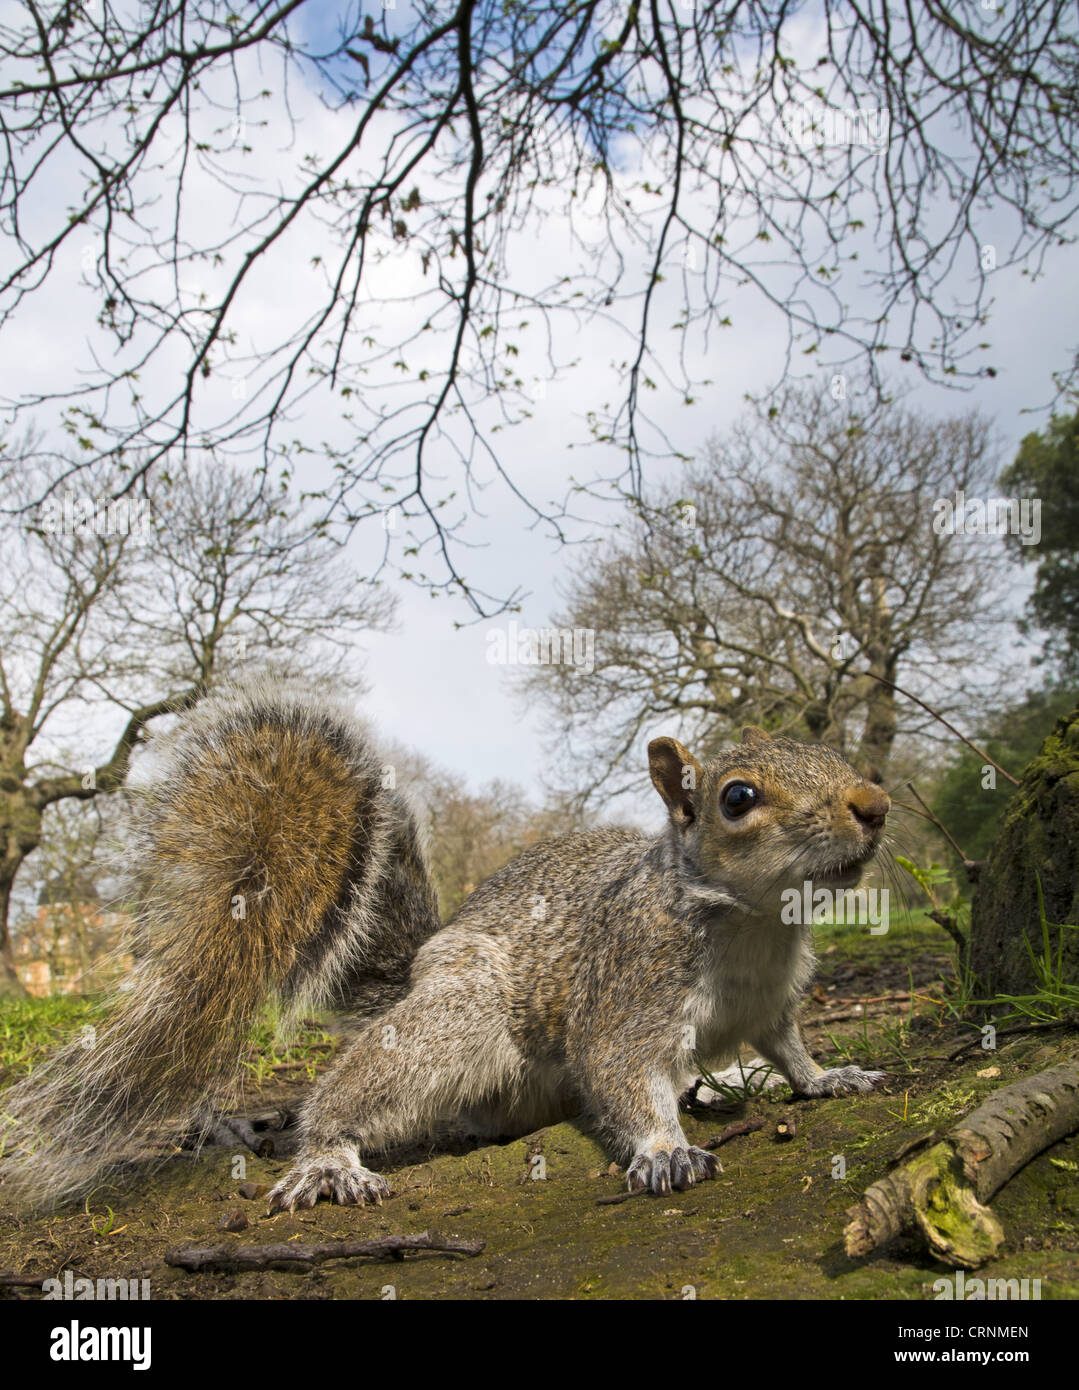 Eastern Grey Squirrel (Sciurus carolinensis) introduced species, adult, standing on ground in city parkland, Greenwich Park, Stock Photo